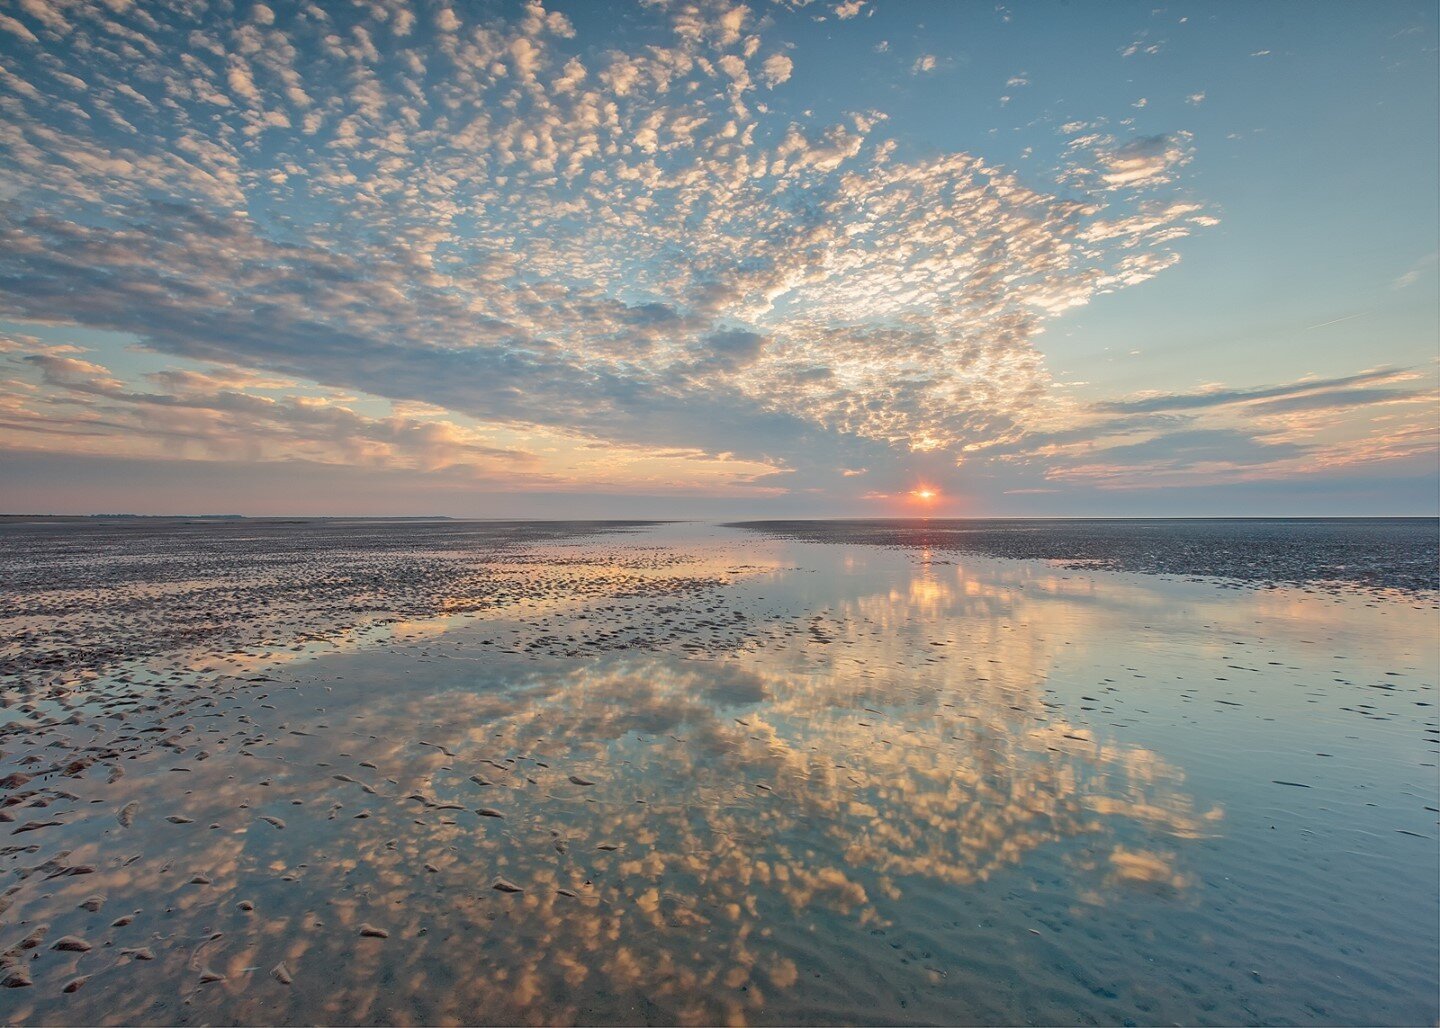 Brancaster Sunset by Maurice Young which was commended by Graeme Taplin when he judged June's Monthly Image Competition - a lovely image that could stand out as simply a classic landscape. However, the longer you look at it, the lines of the horizon,